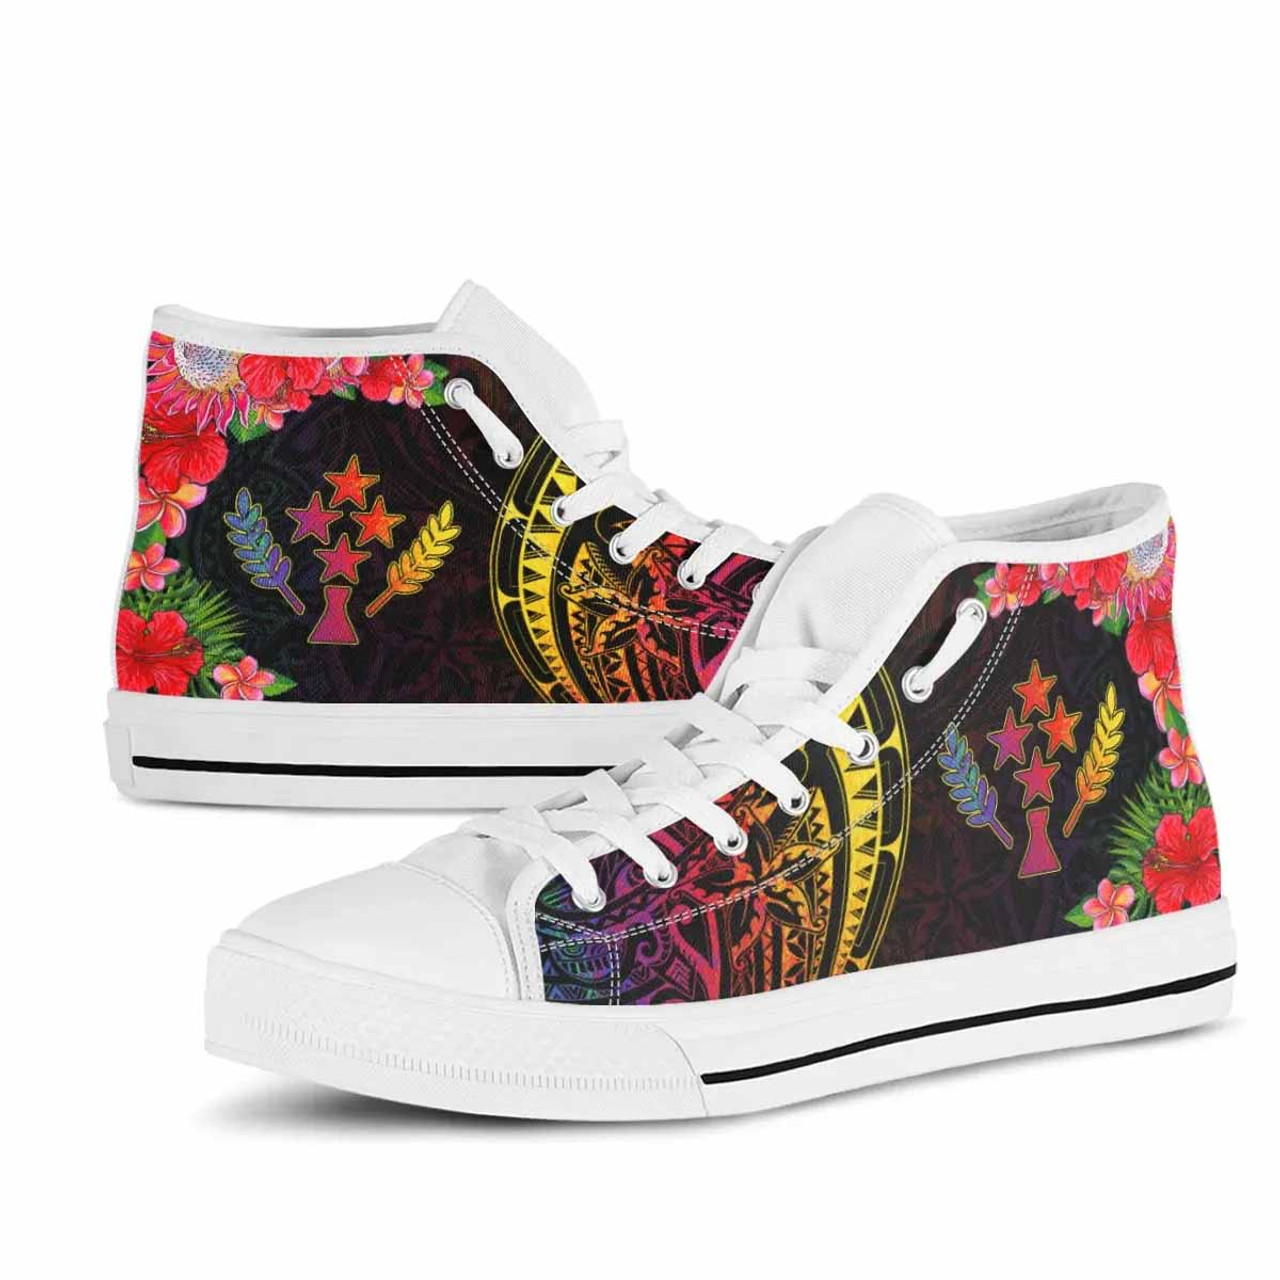 Kosrae State High Top Shoes - Tropical Hippie Style 8